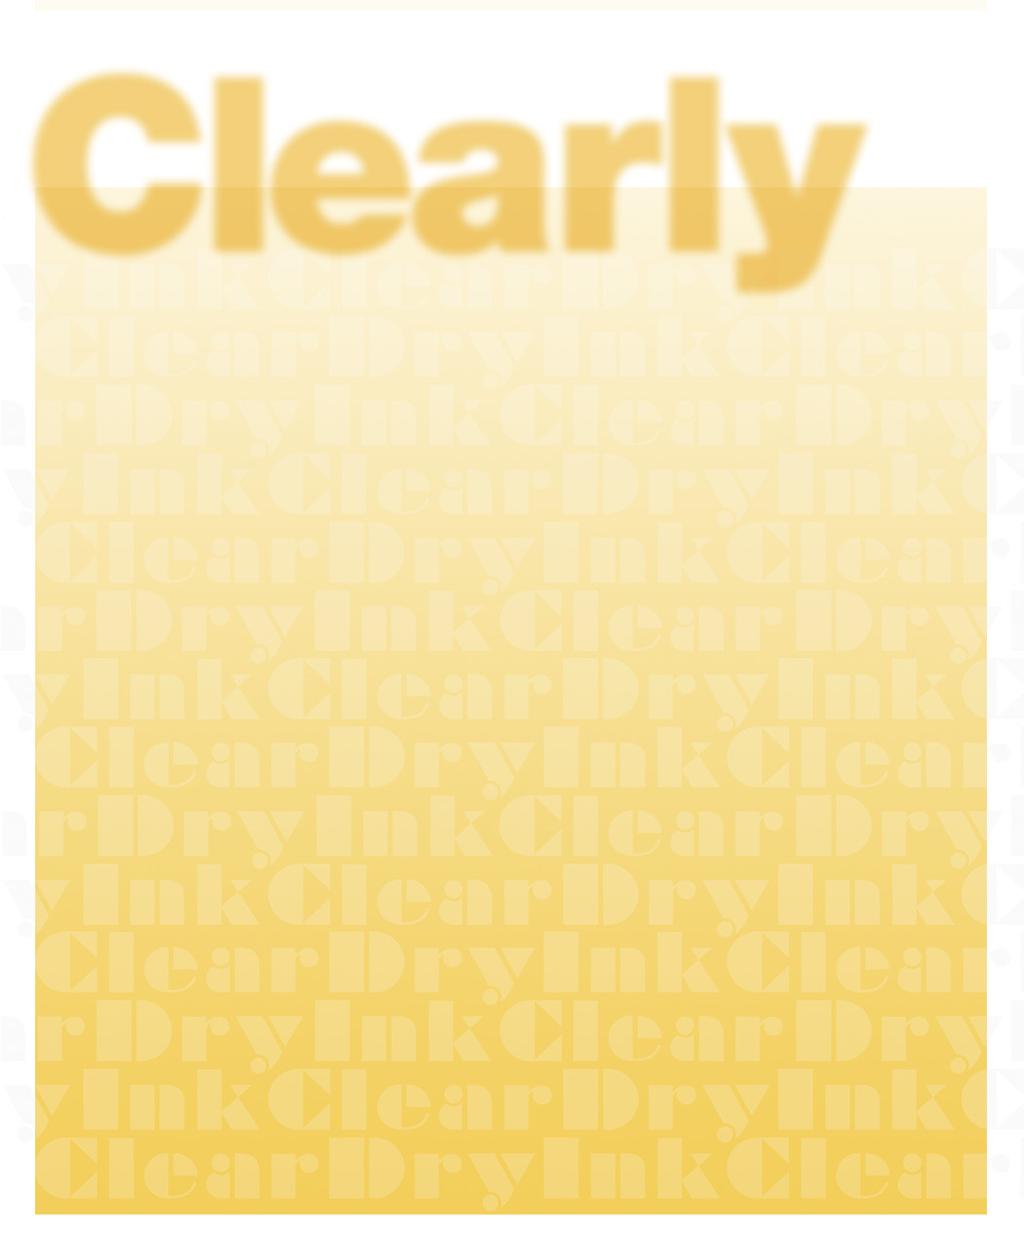 C L E A R D R Y I N K easy! Clear Dry Ink has the power to dazzle and draw attention to your designs two essential ingredients for successful promotional materials.